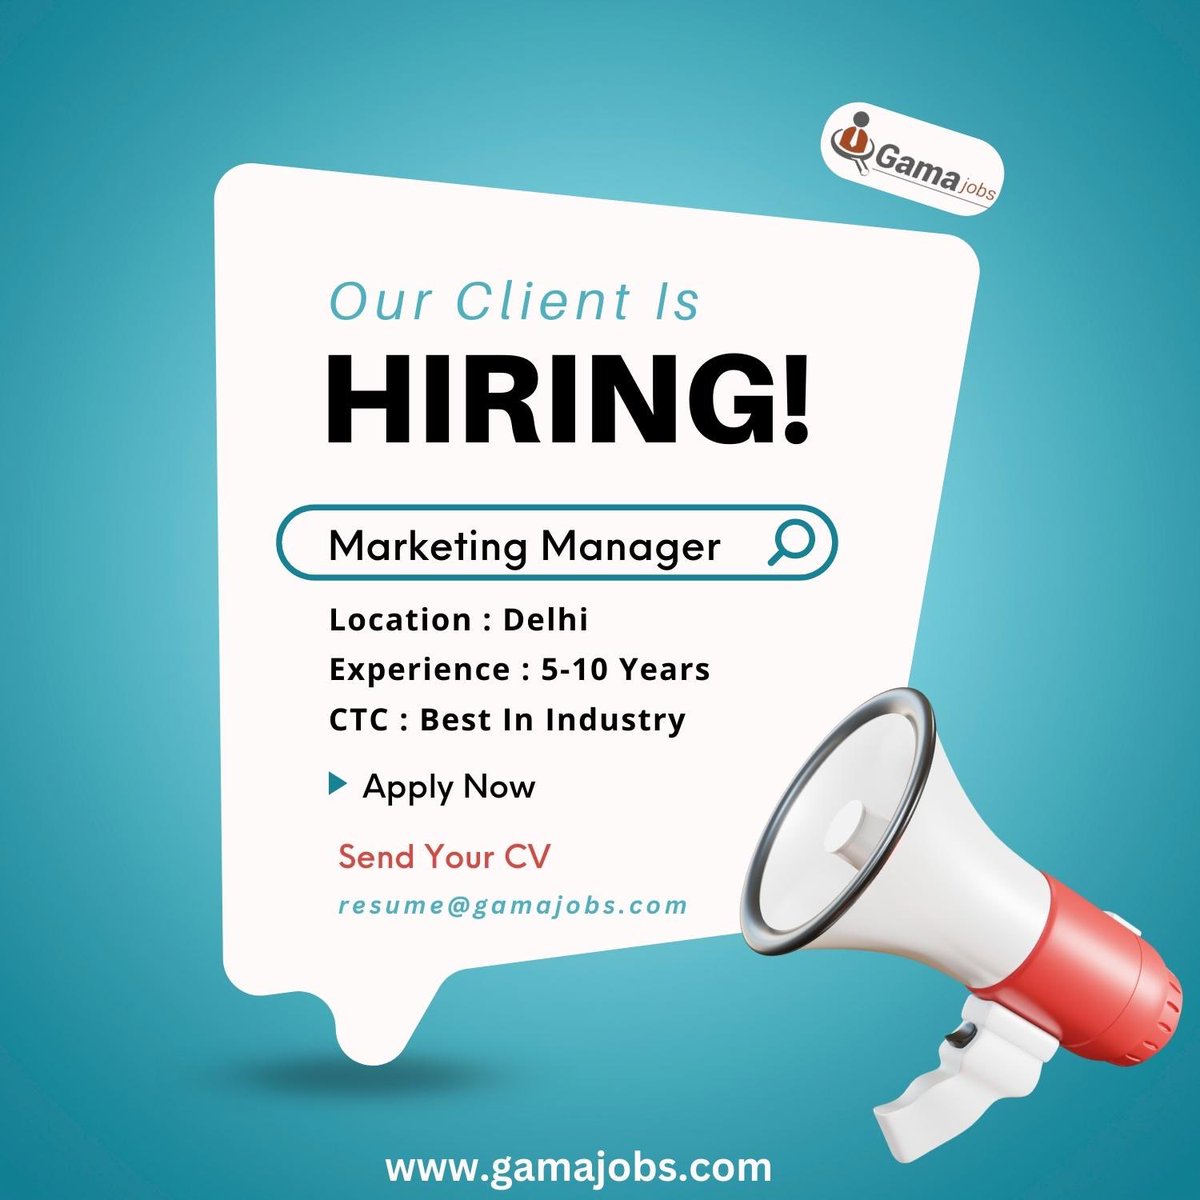 Are you a talented and dynamic Marketing Manager looking for your next exciting opportunity? 
To apply,
Visit: gamajobs.com/job_detail/ind…
or email your resume to resume@gamajobs.com.
Visit our website gamajobs.com 

#marketingmanager #delhijobs #hiringnow #bestinindustry